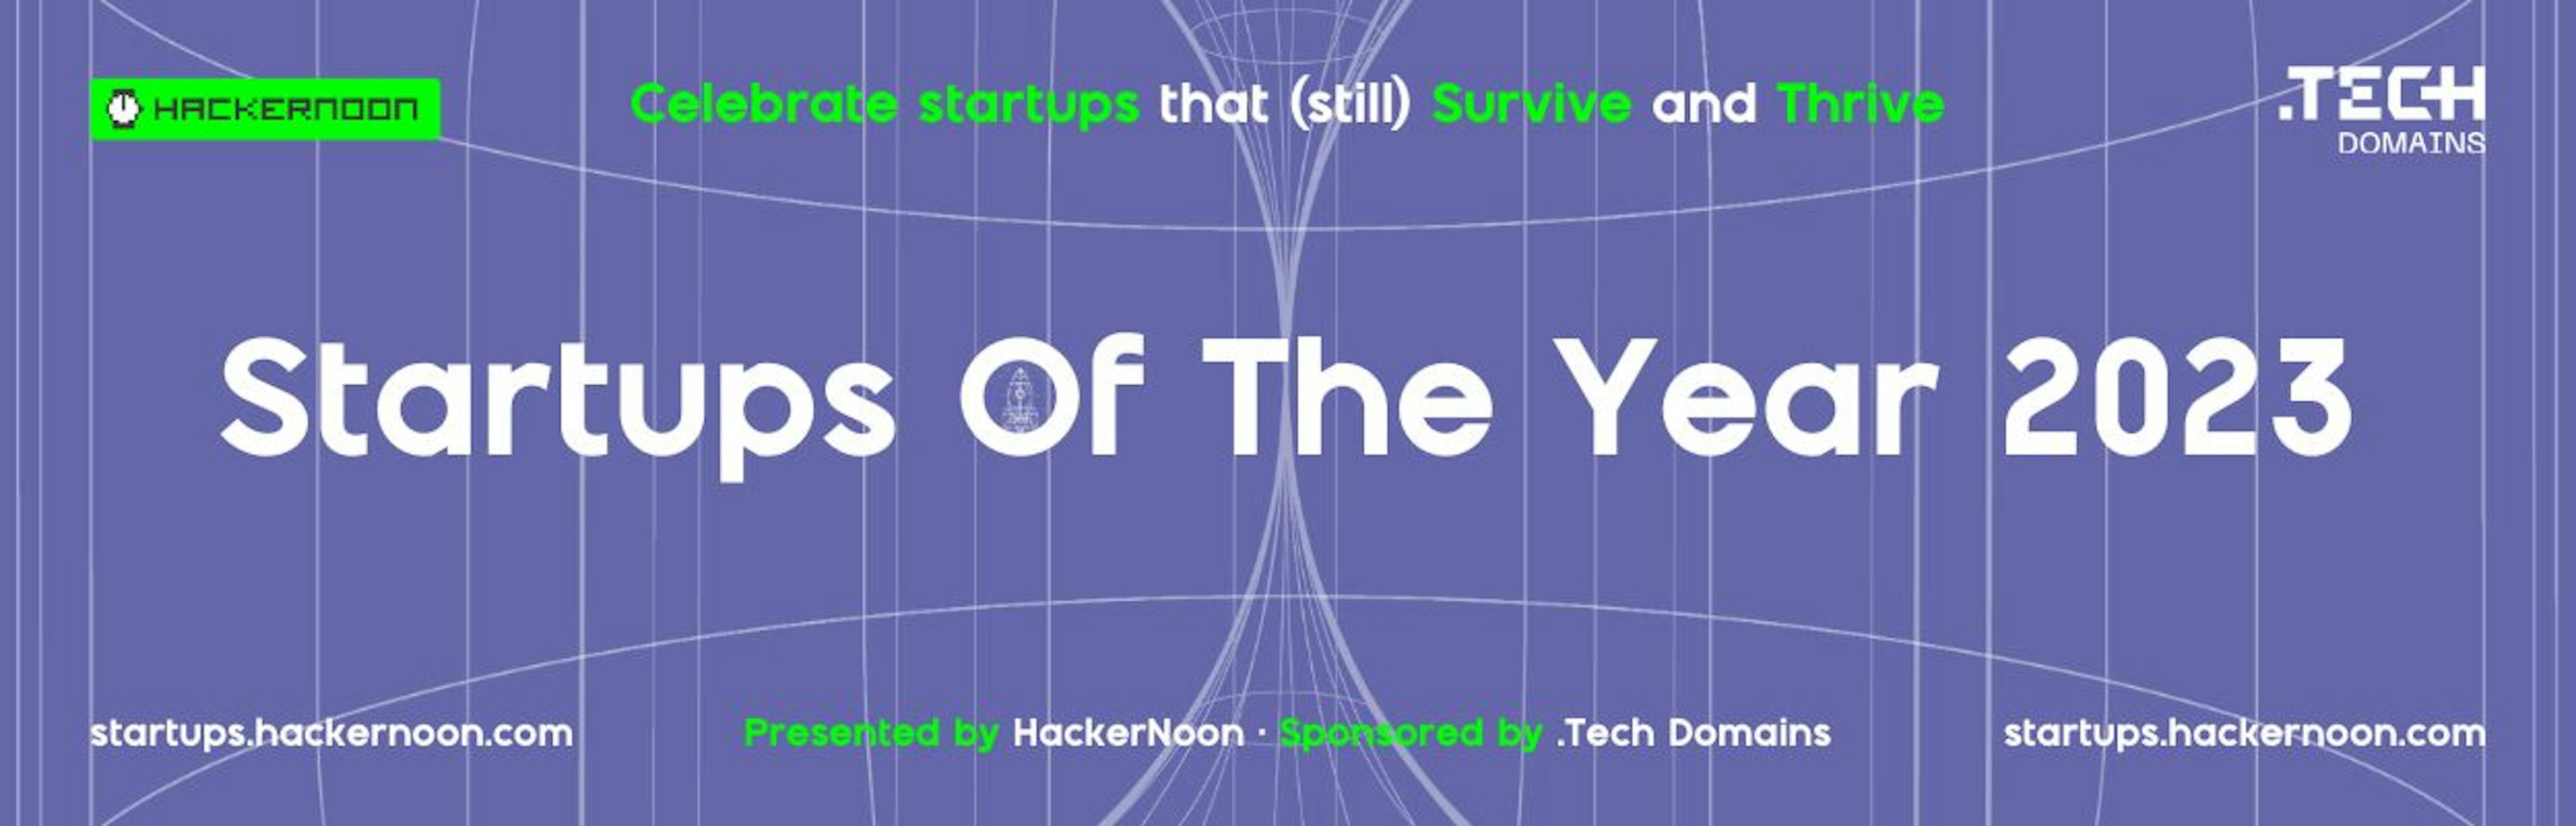 featured image - Startups of The Year 2023: 200+ Startups Nominated in Seattle